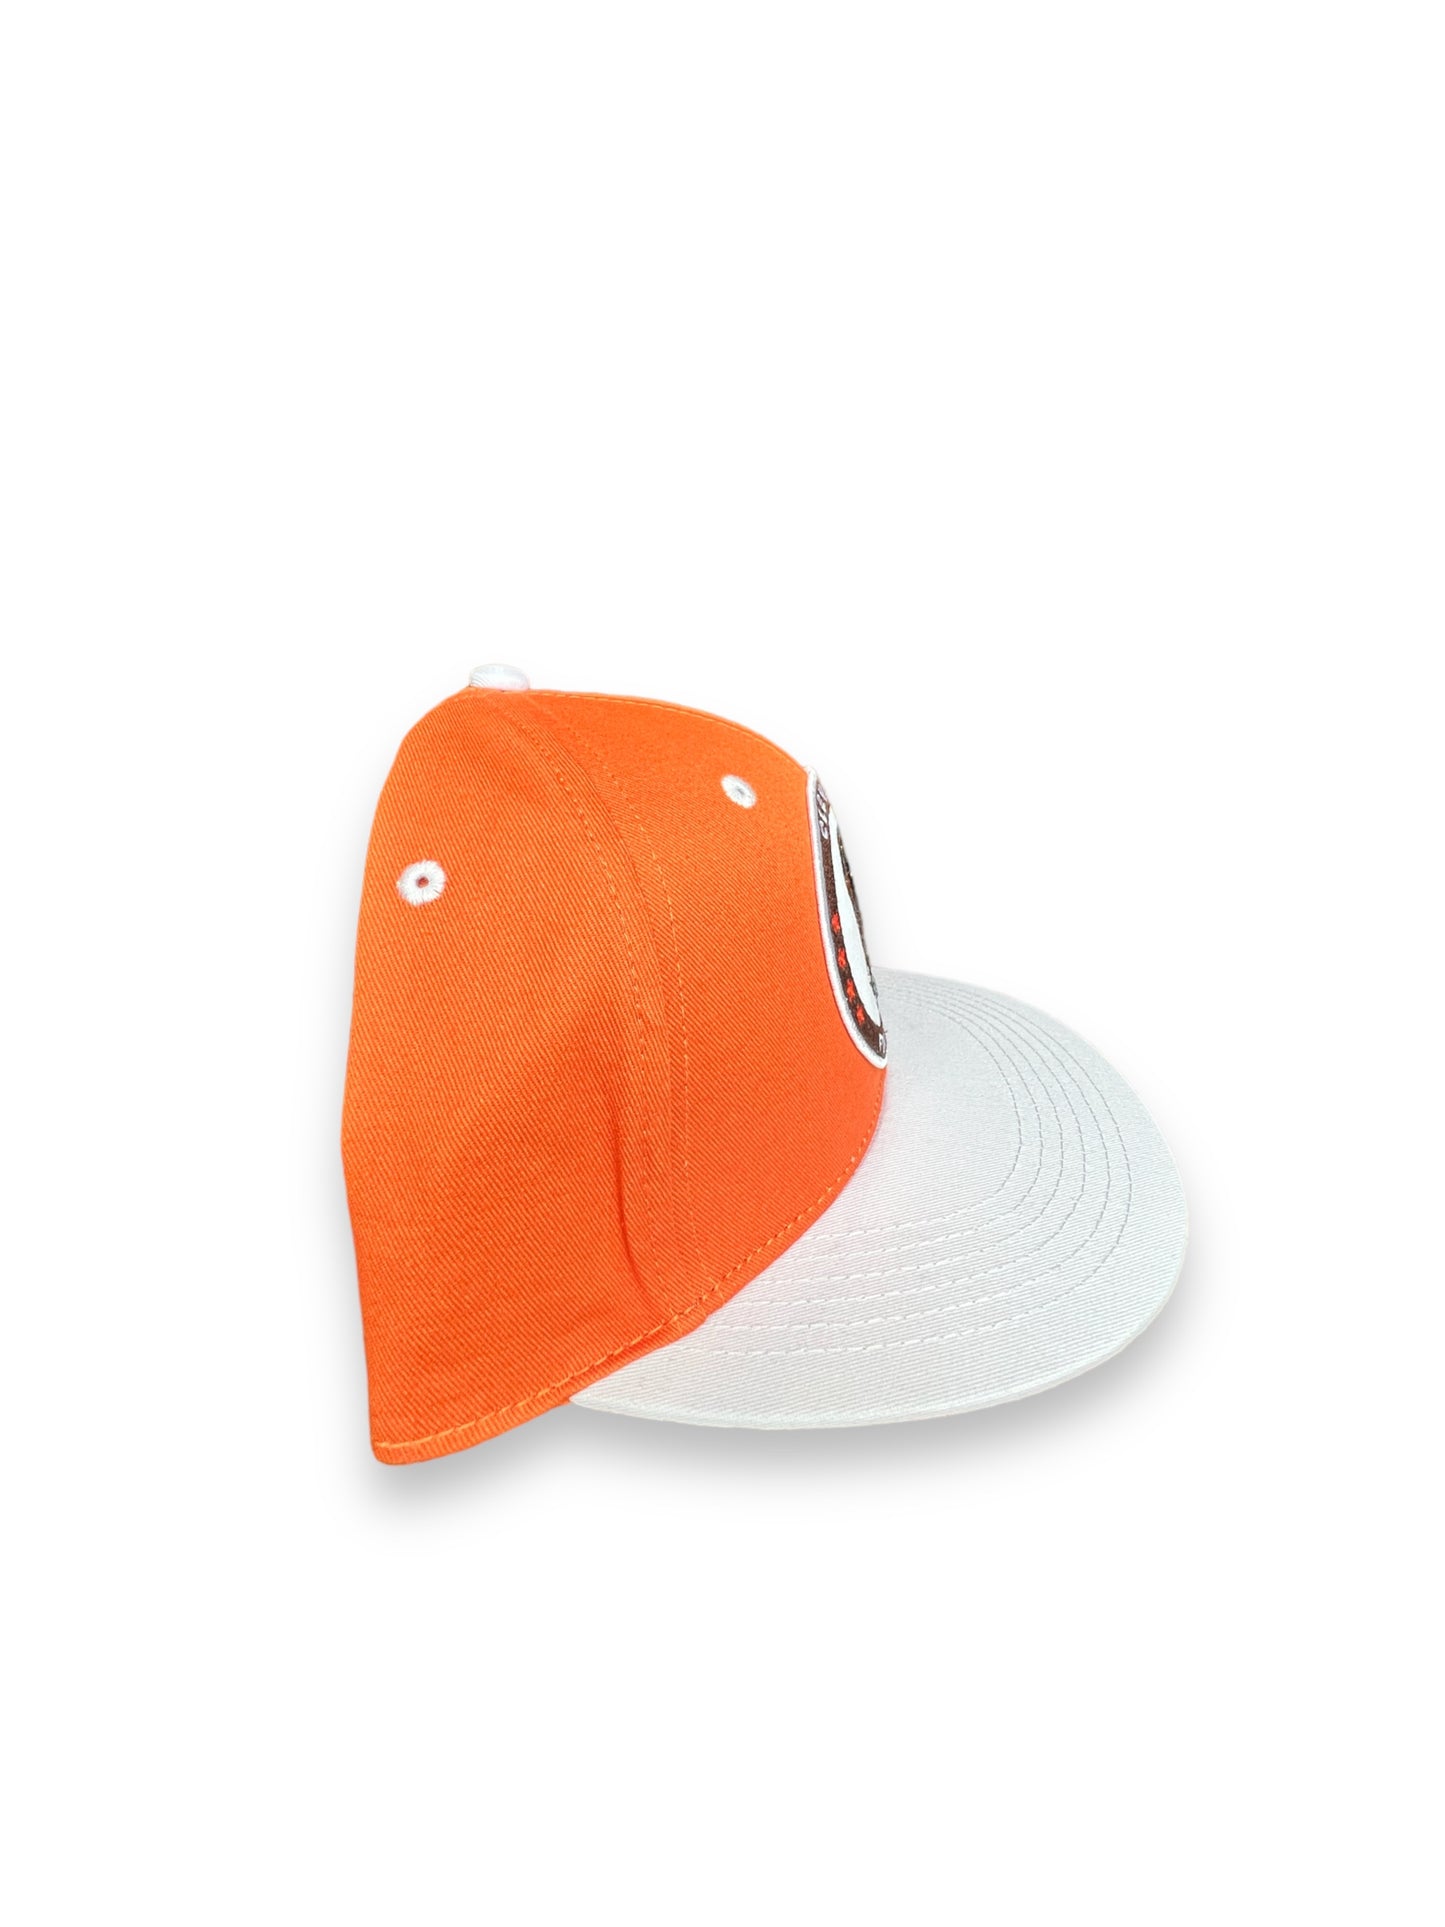 Side view of orange hat with white bill